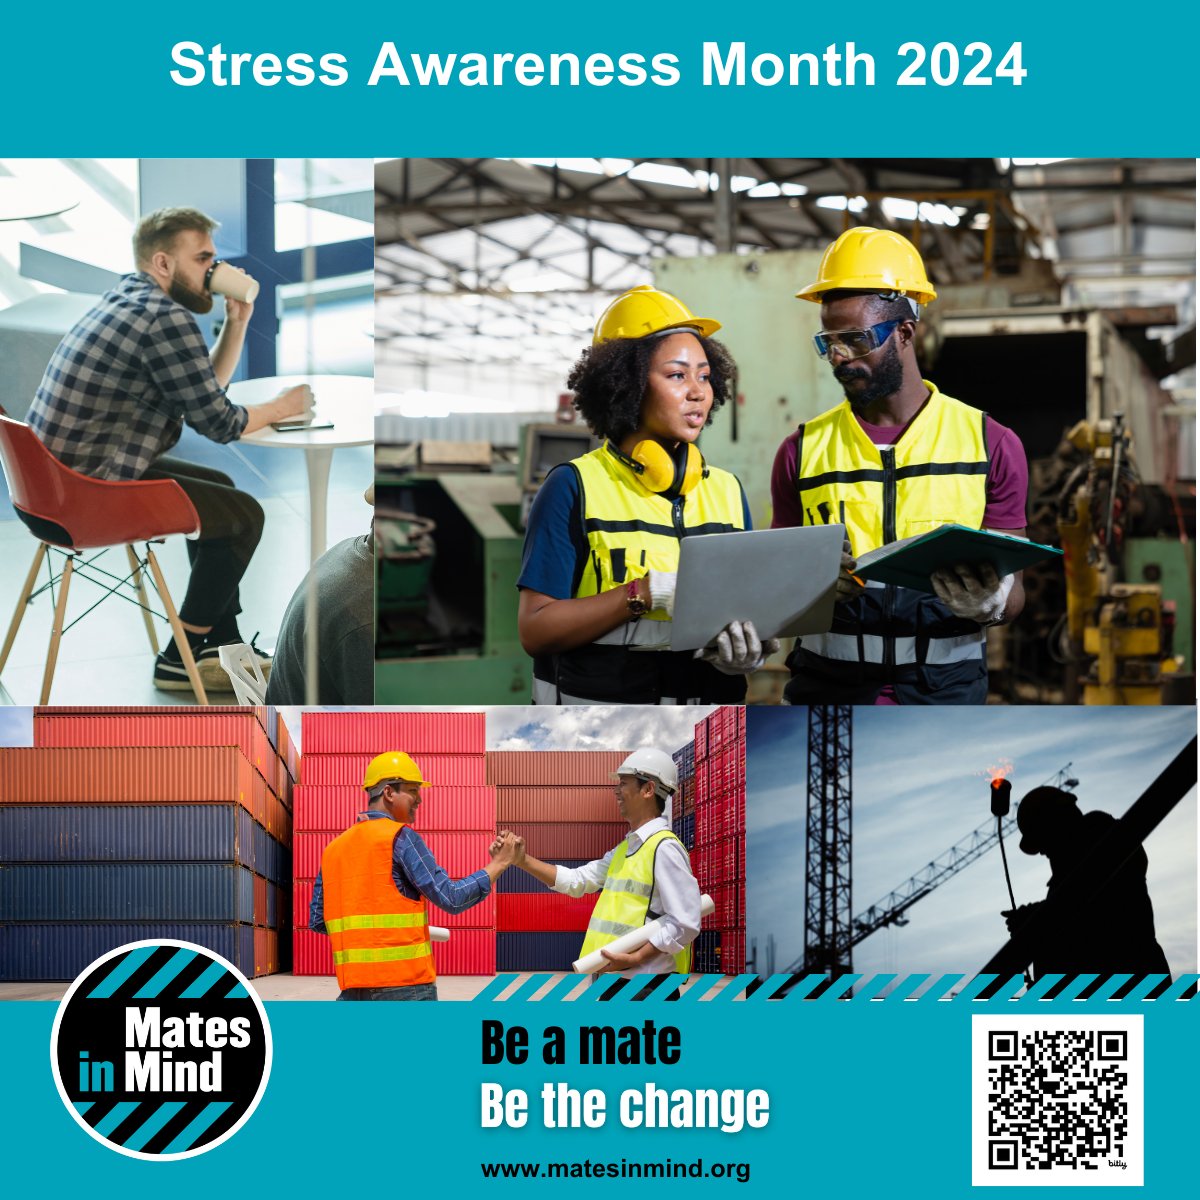 We’re encouraging our Supporters, partners & friends to talk about stress & mental health within their own organisations & across their networks not only during #StressAwarenessMonth2024 (April), but also throughout the year. Download the poster: bit.ly/SAM24sm